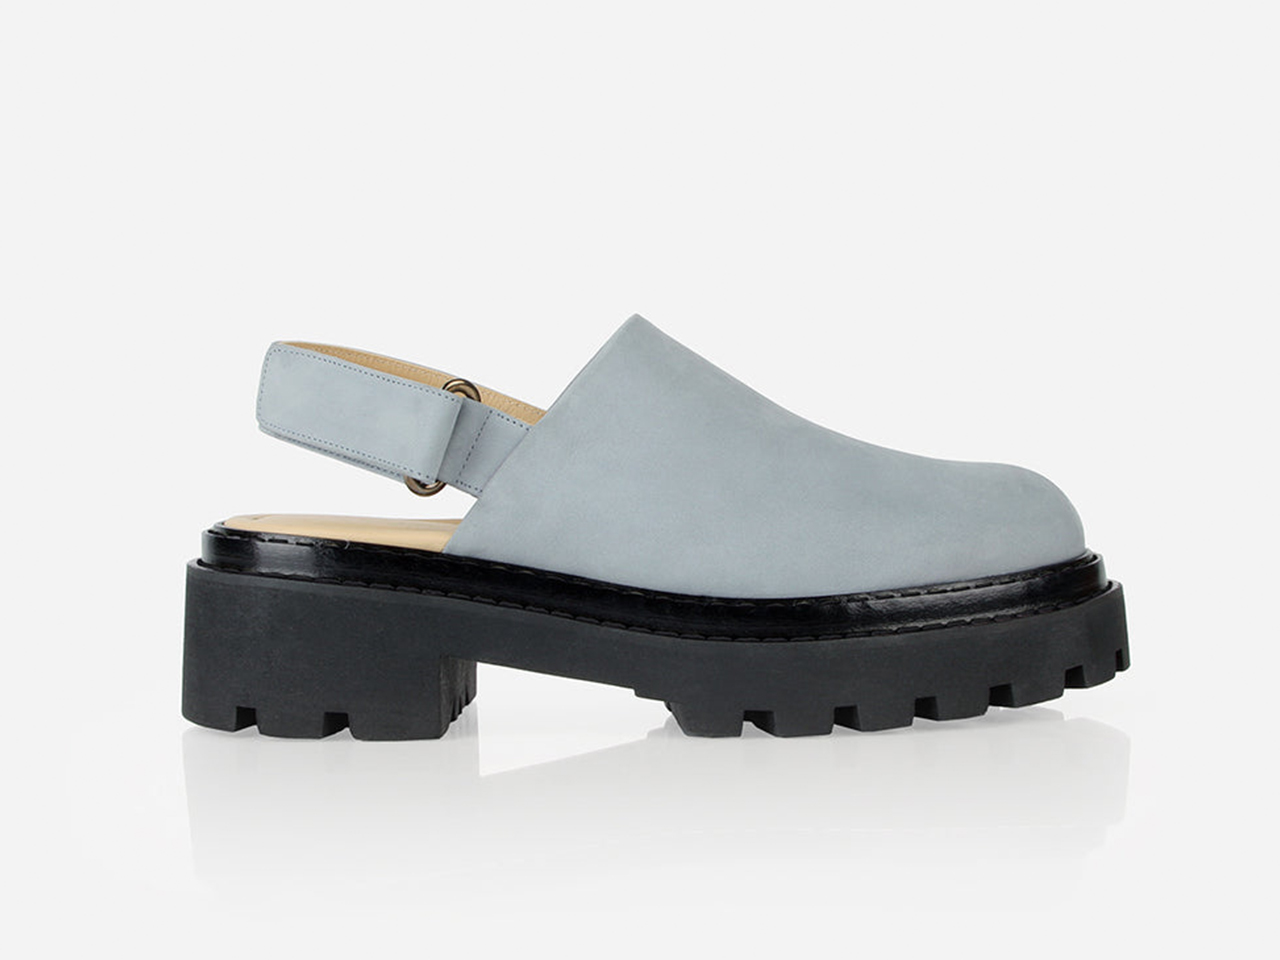 A side profile of a pair of pastel blue suede clogs with black lug soles from Poppy Barley.